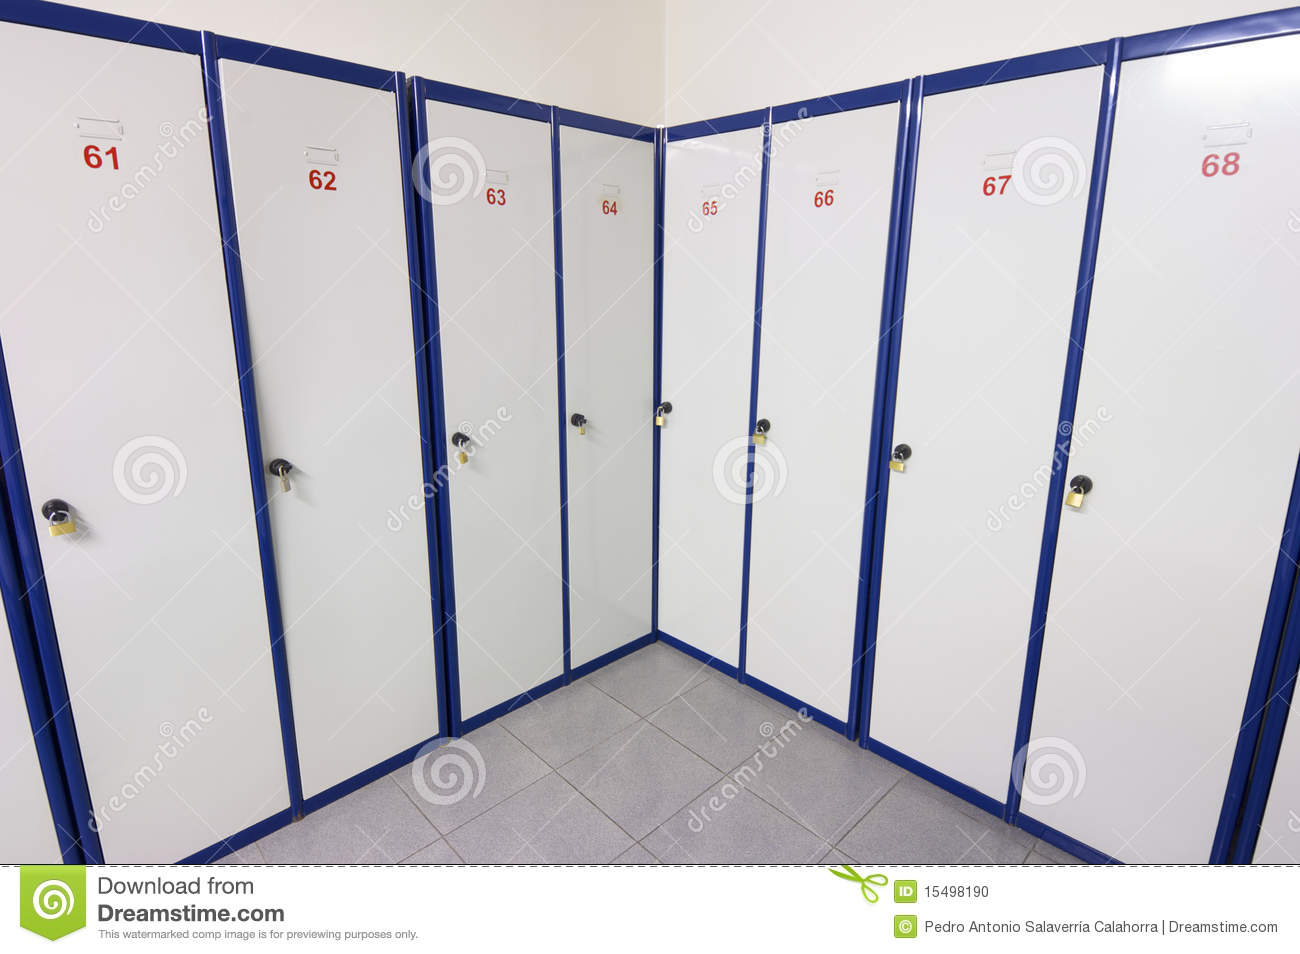 Lockers Numbered White And Blue For Clothing And Personal Items 